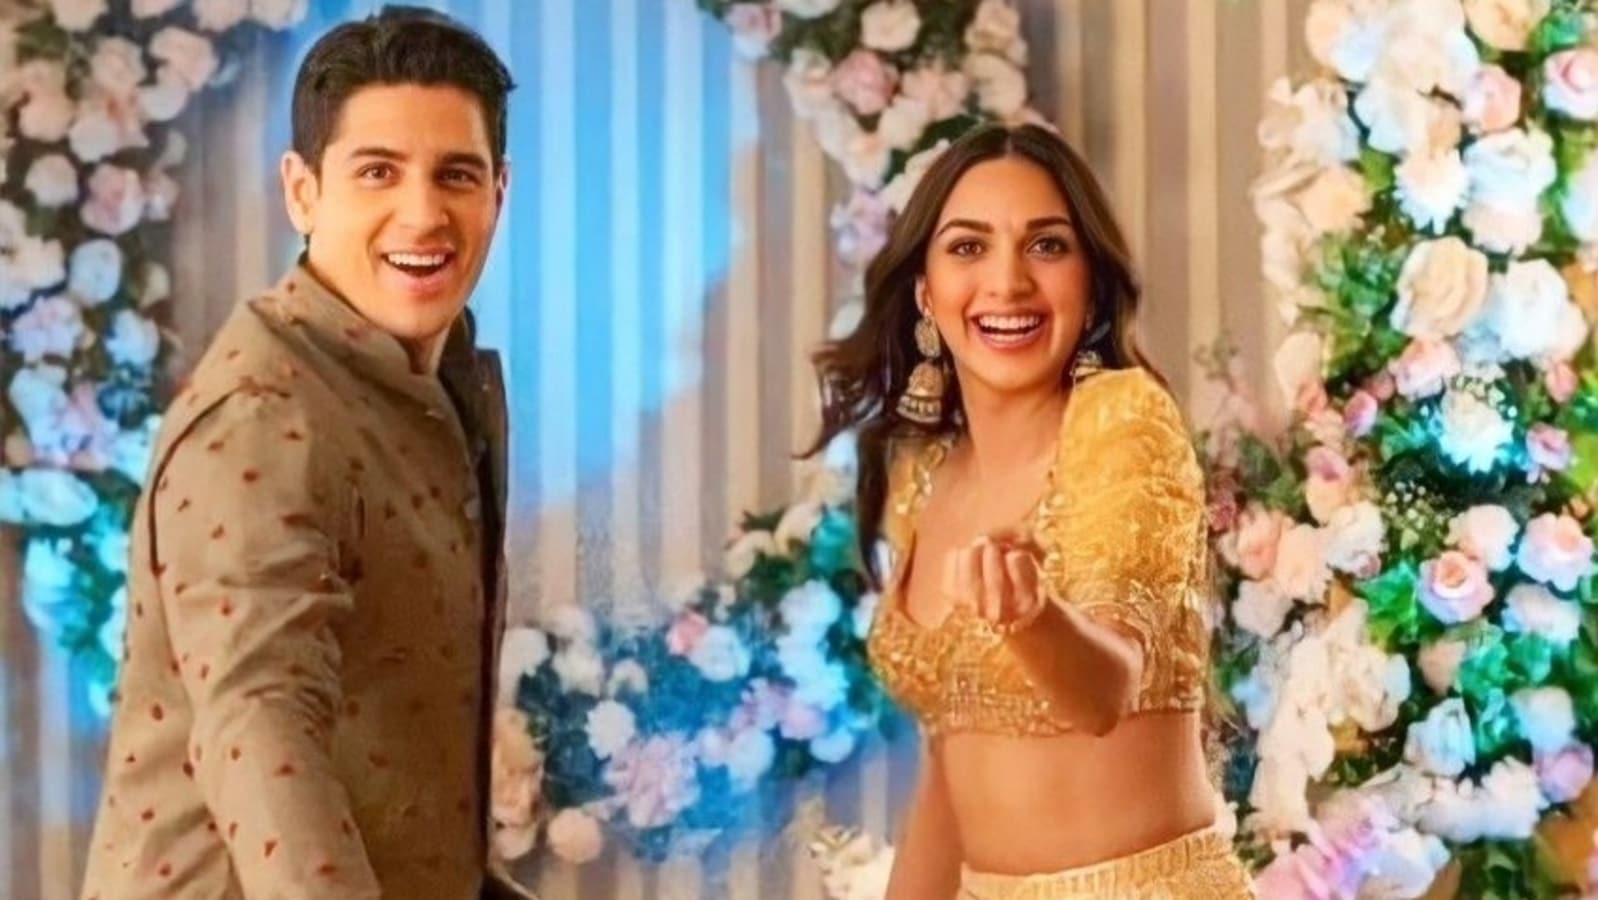 fans-say-sidharth-malhotra-kiara-advani-look-married-in-unseen-video-from-ad-shoot-the-way-she-looks-at-him